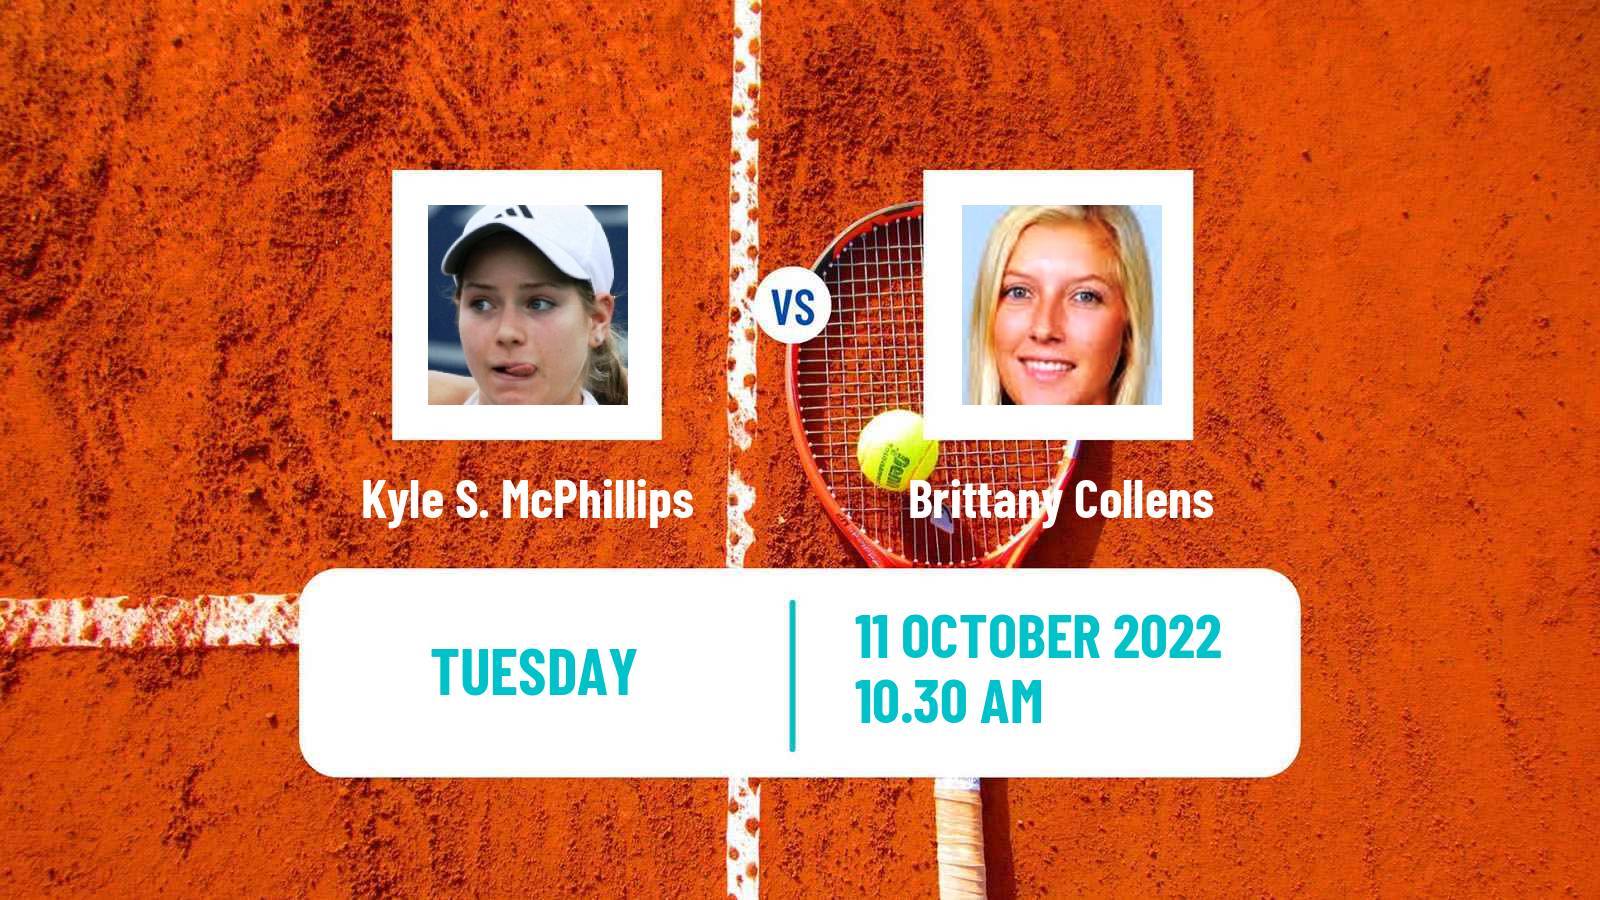 Tennis ITF Tournaments Kyle S. McPhillips - Brittany Collens